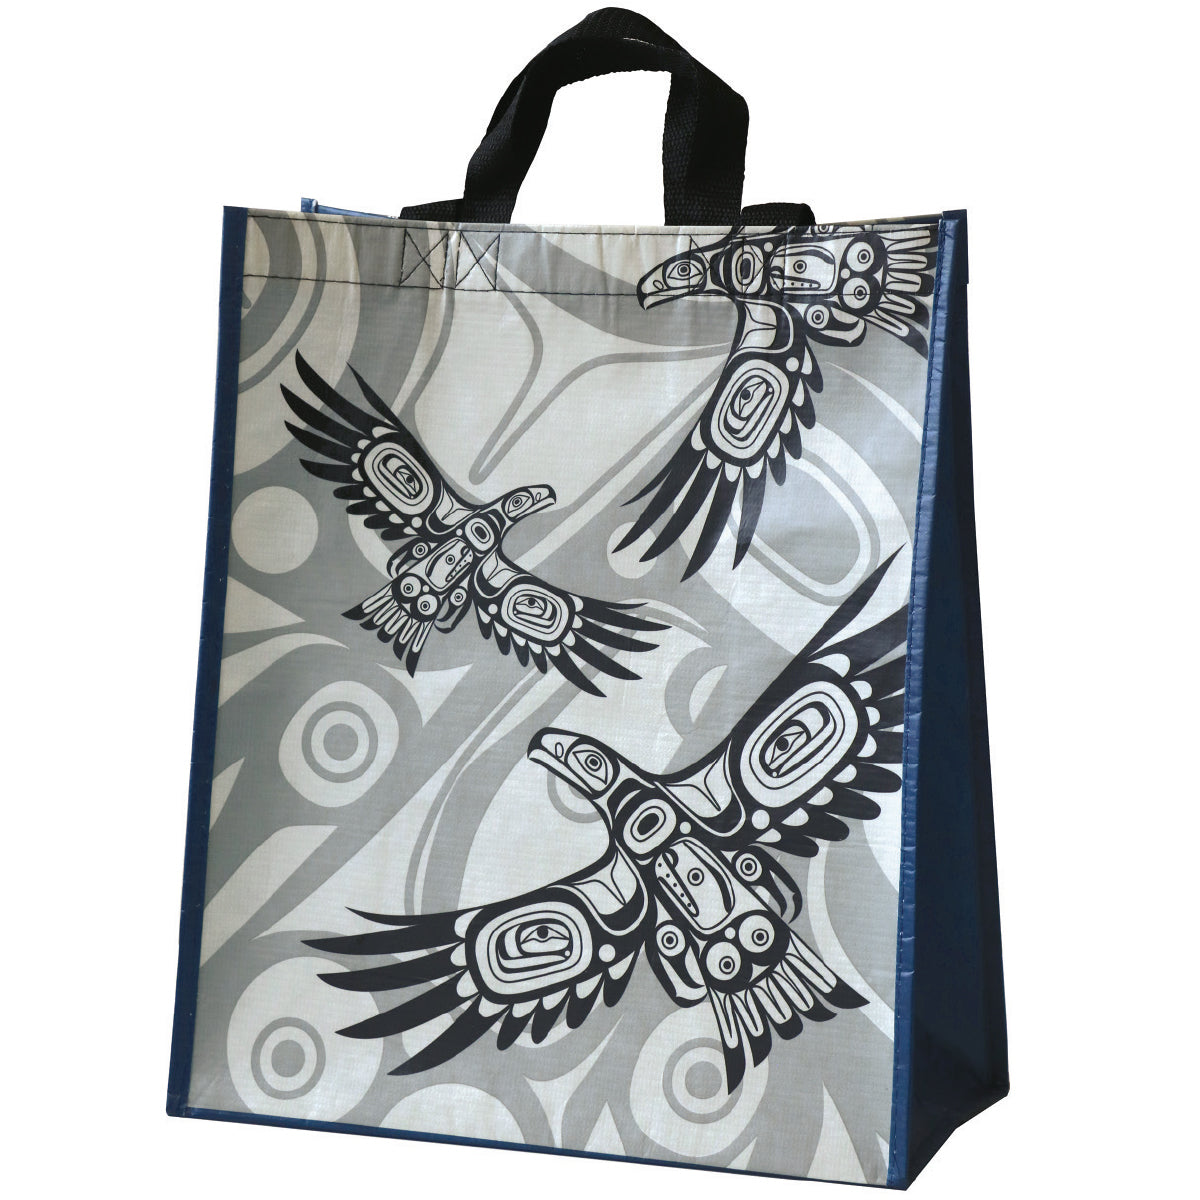 Eco Bag Large Corey Bullpit Soaring Eagle - Eco Bag Large Corey Bullpit Soaring Eagle -  - House of Himwitsa Native Art Gallery and Gifts